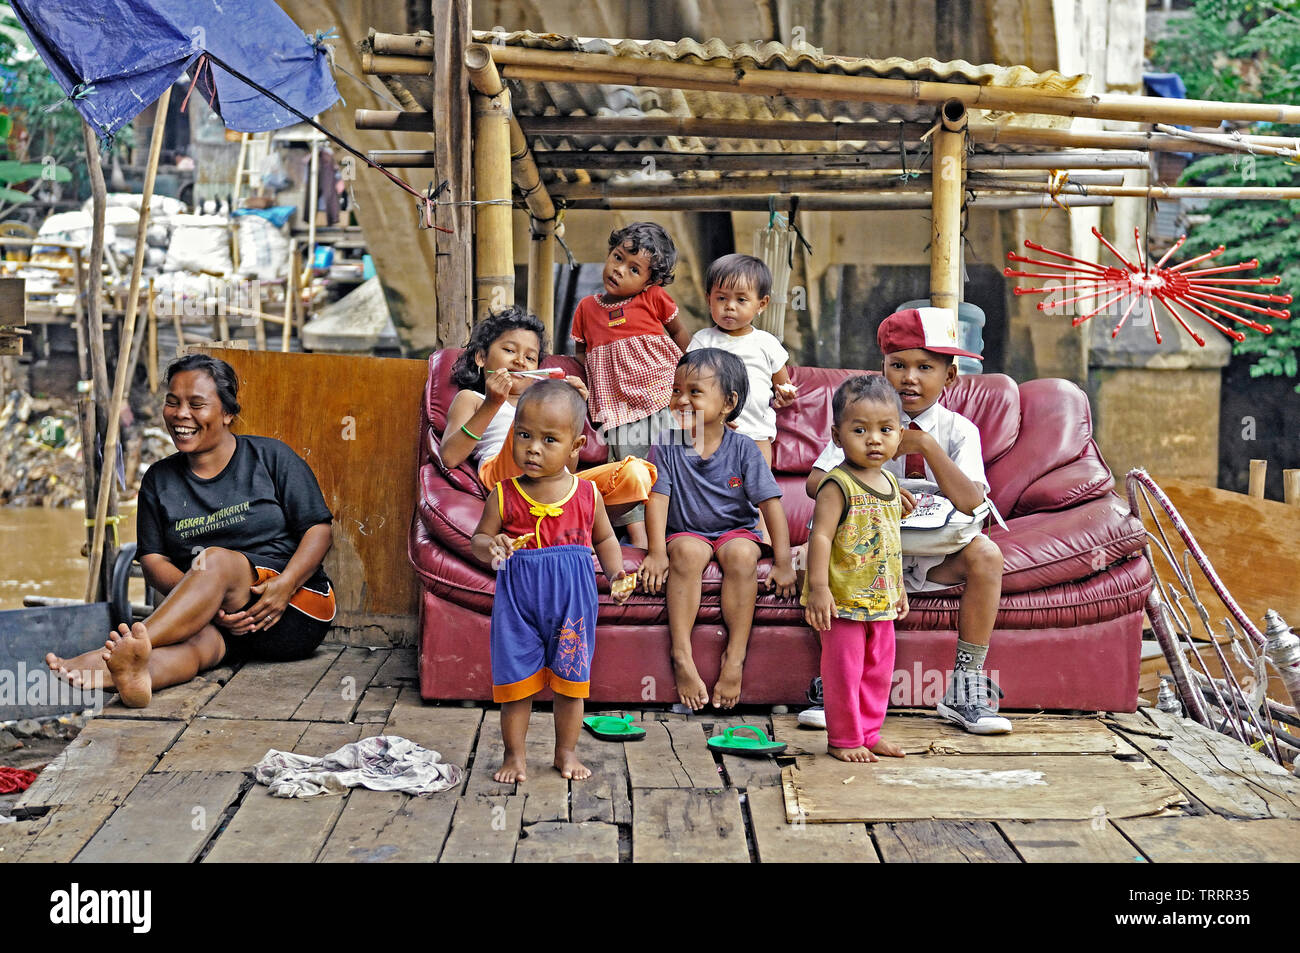 jakarta, dki jakarta/indonesia - november 16, 2009: poor squatter people enjoying life on a couch in  kampung melayu at the banks of ciliwung river Stock Photo